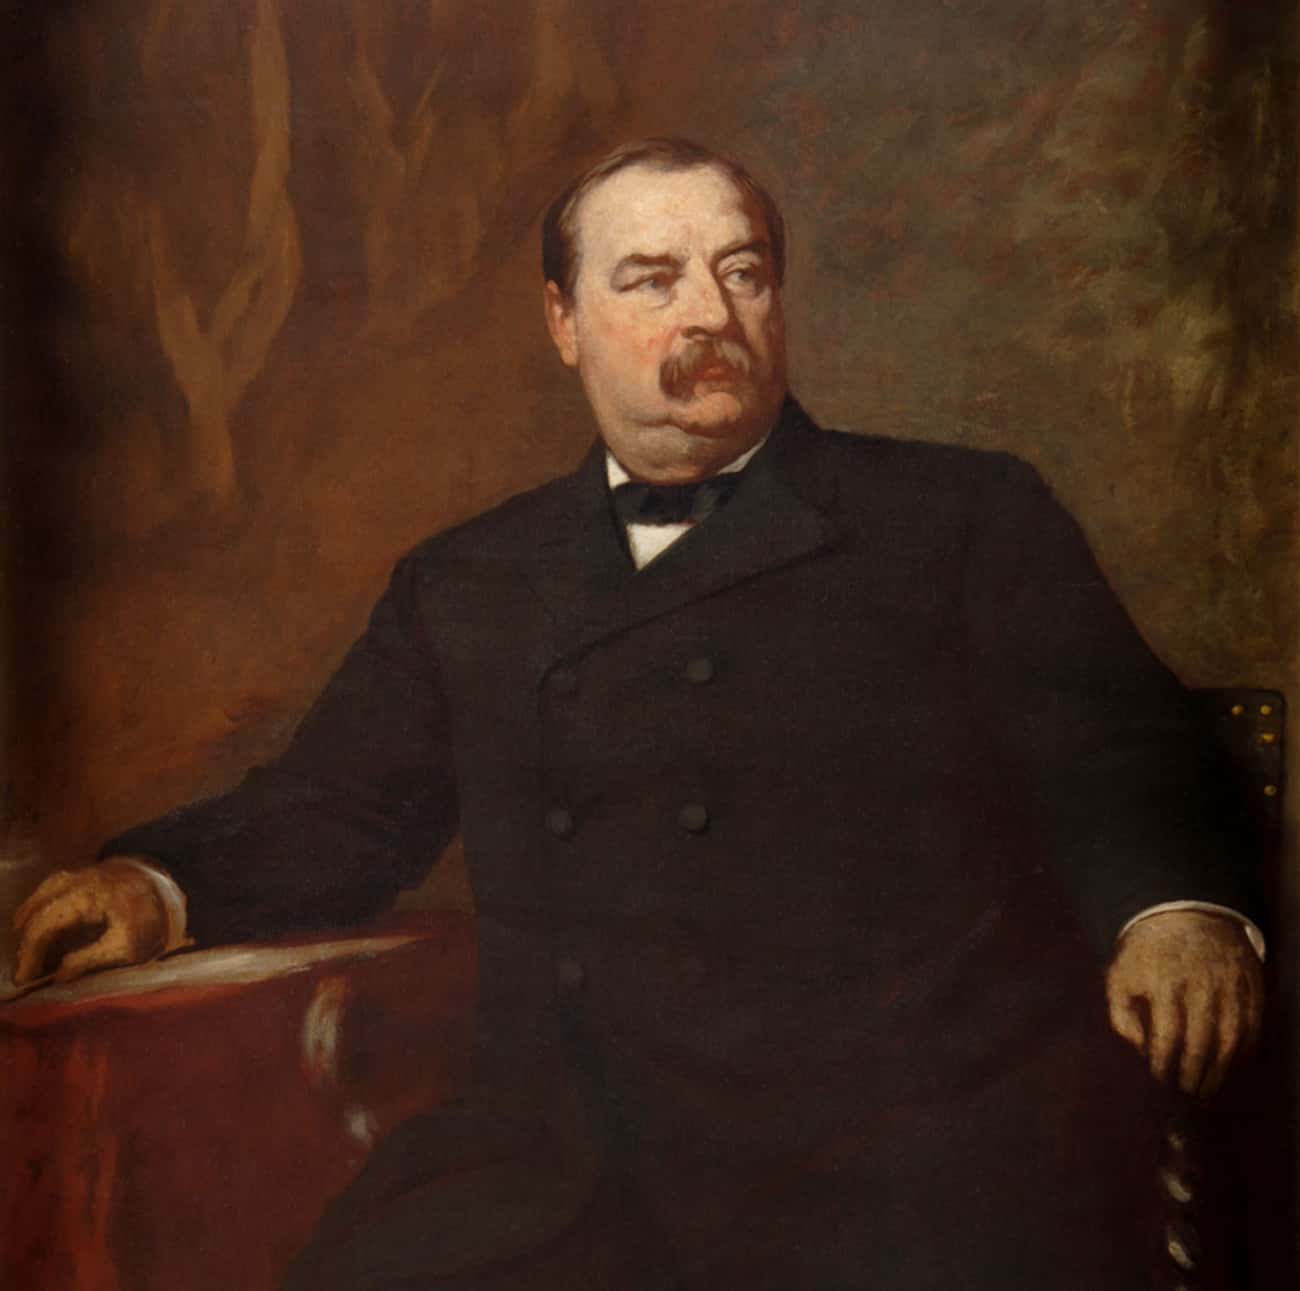 'What Is The Use Of Being Elected Or Reelected Unless You Stand For Something?' - Grover Cleveland